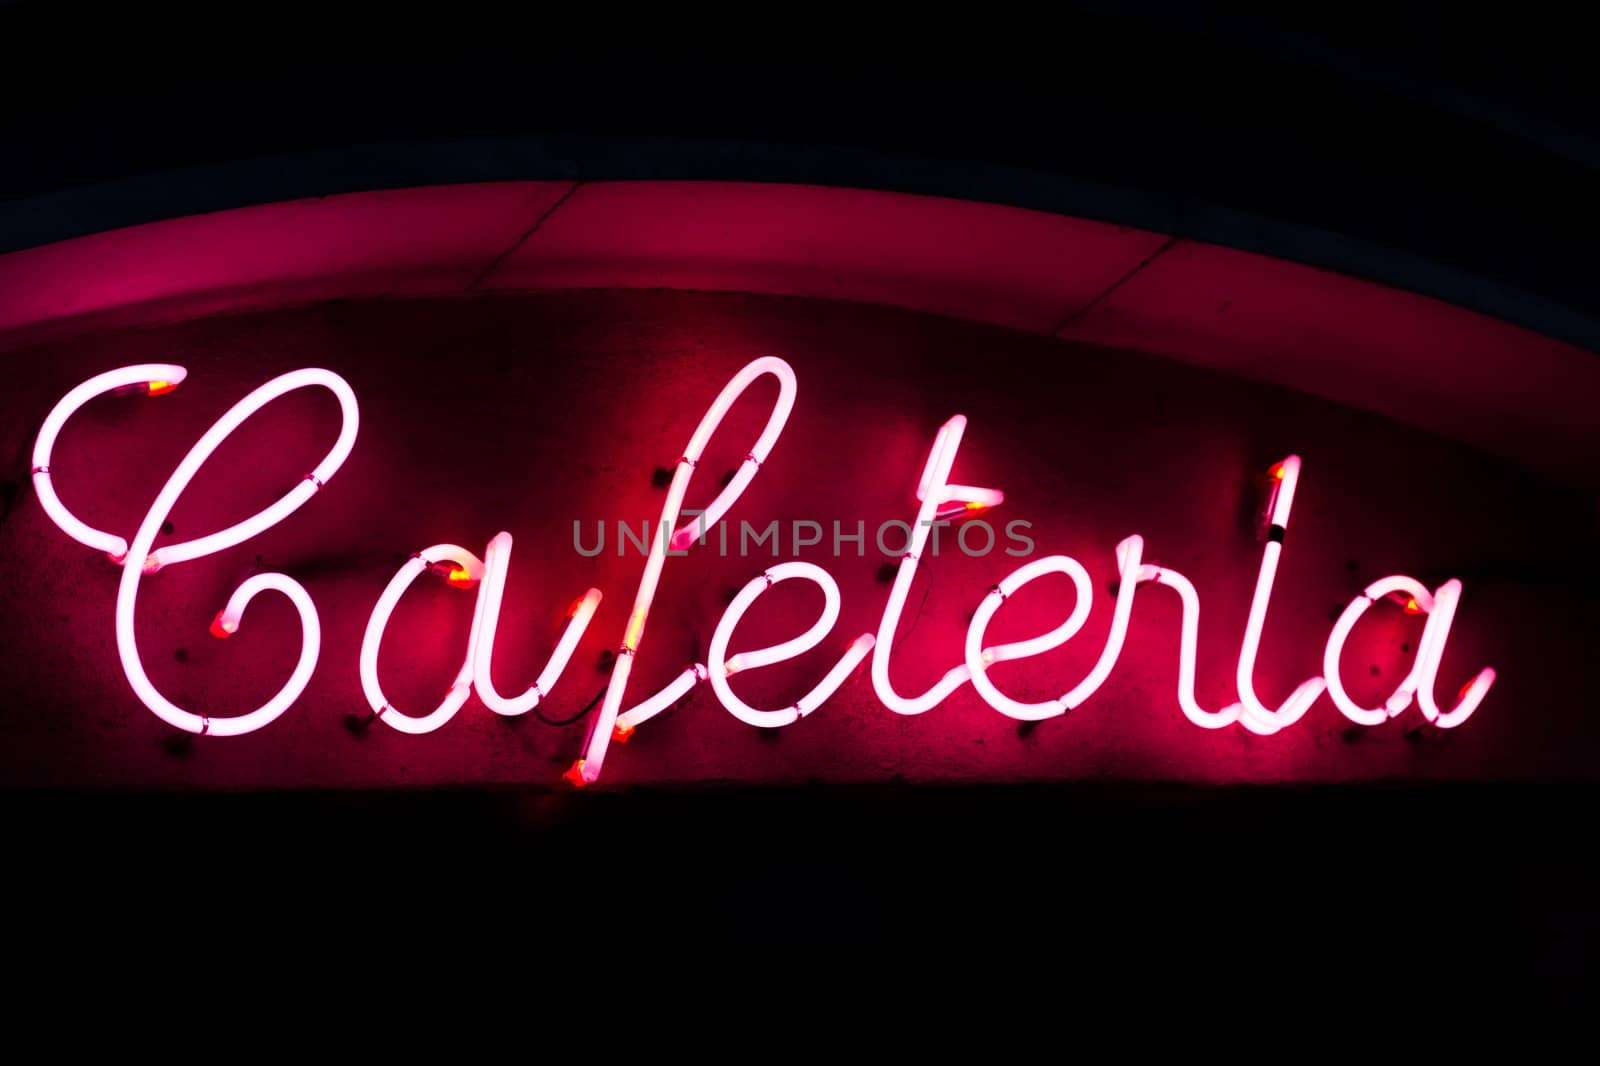 Cafeteria neon sign by kyrien